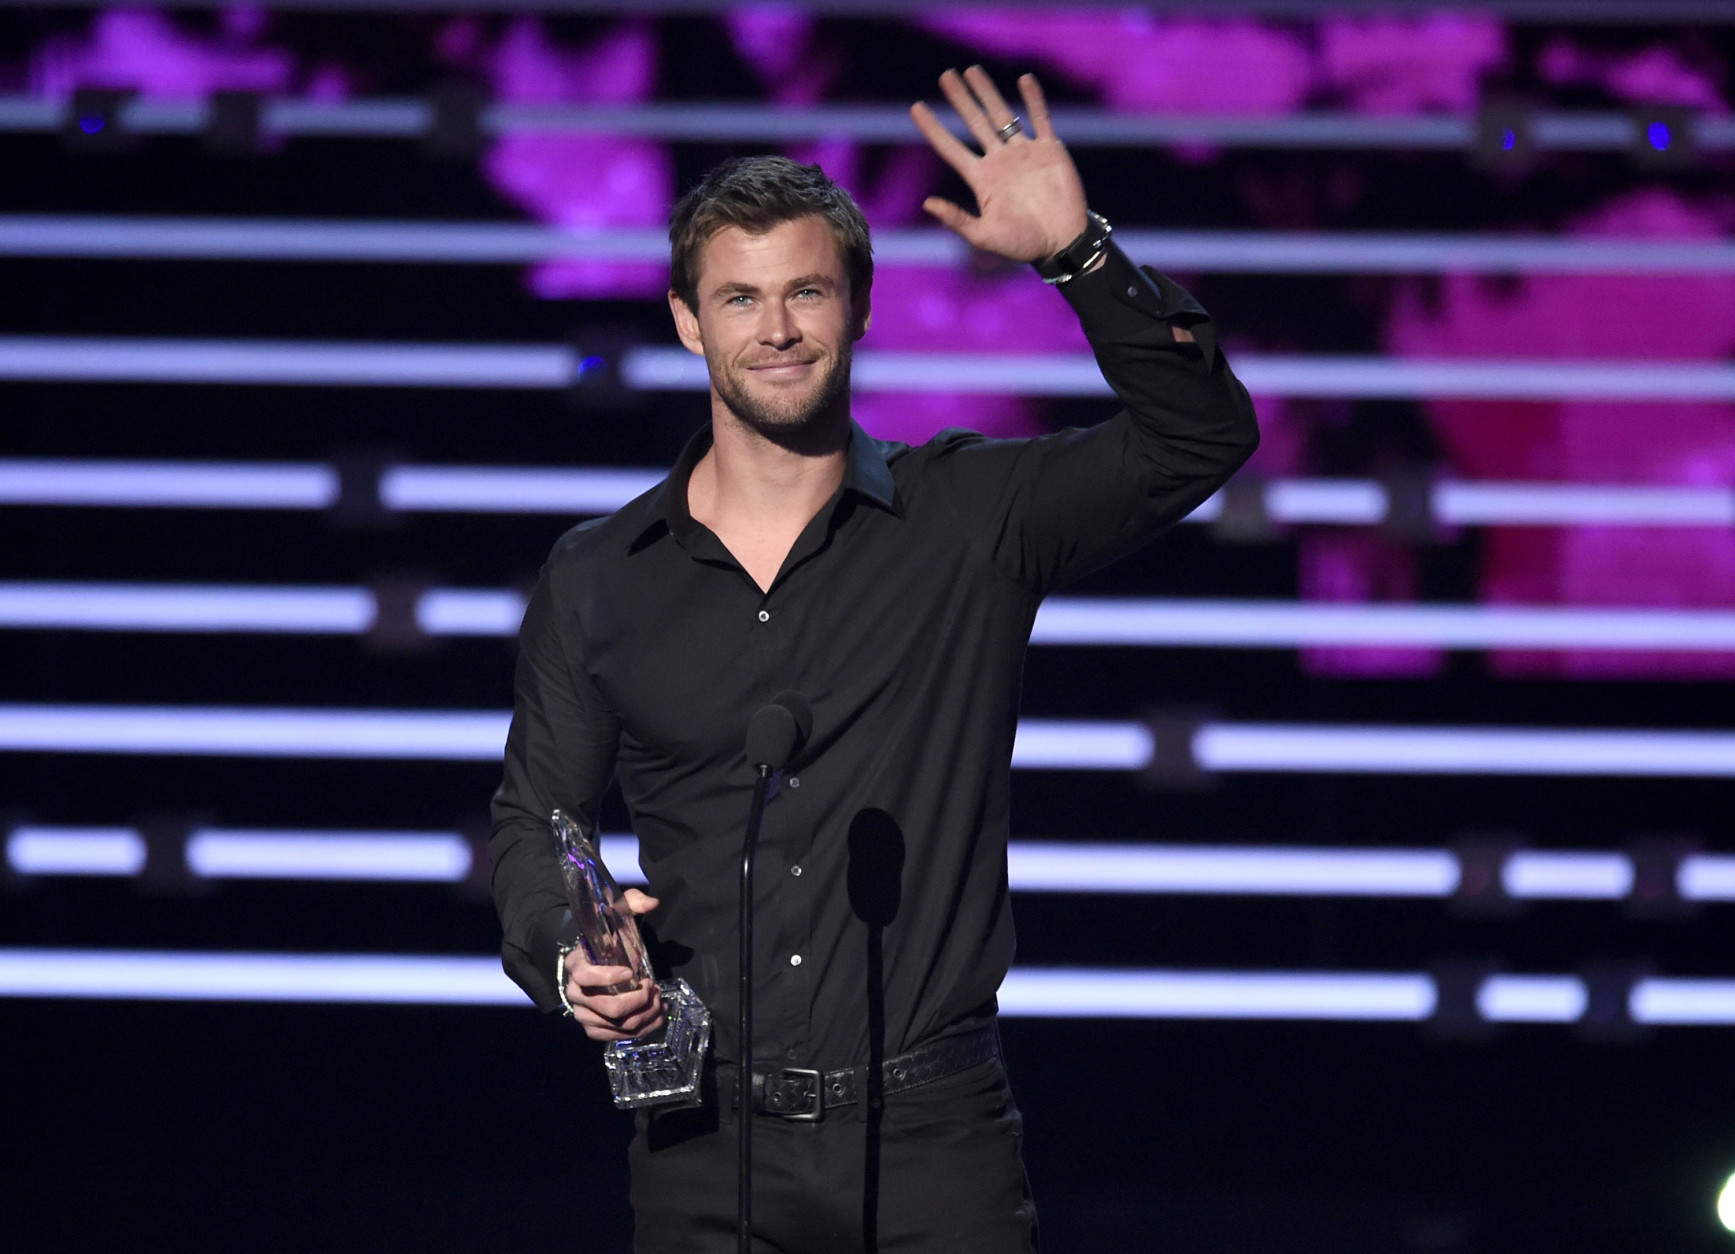 Chris Hemsworth accepts the award for favorite action movie actor for Avengers: Age Of Ultron at the People's Choice Awards at the Microsoft Theater on Wednesday, Jan. 6, 2016, in Los Angeles. (Photo by Chris Pizzello/Invision/AP)